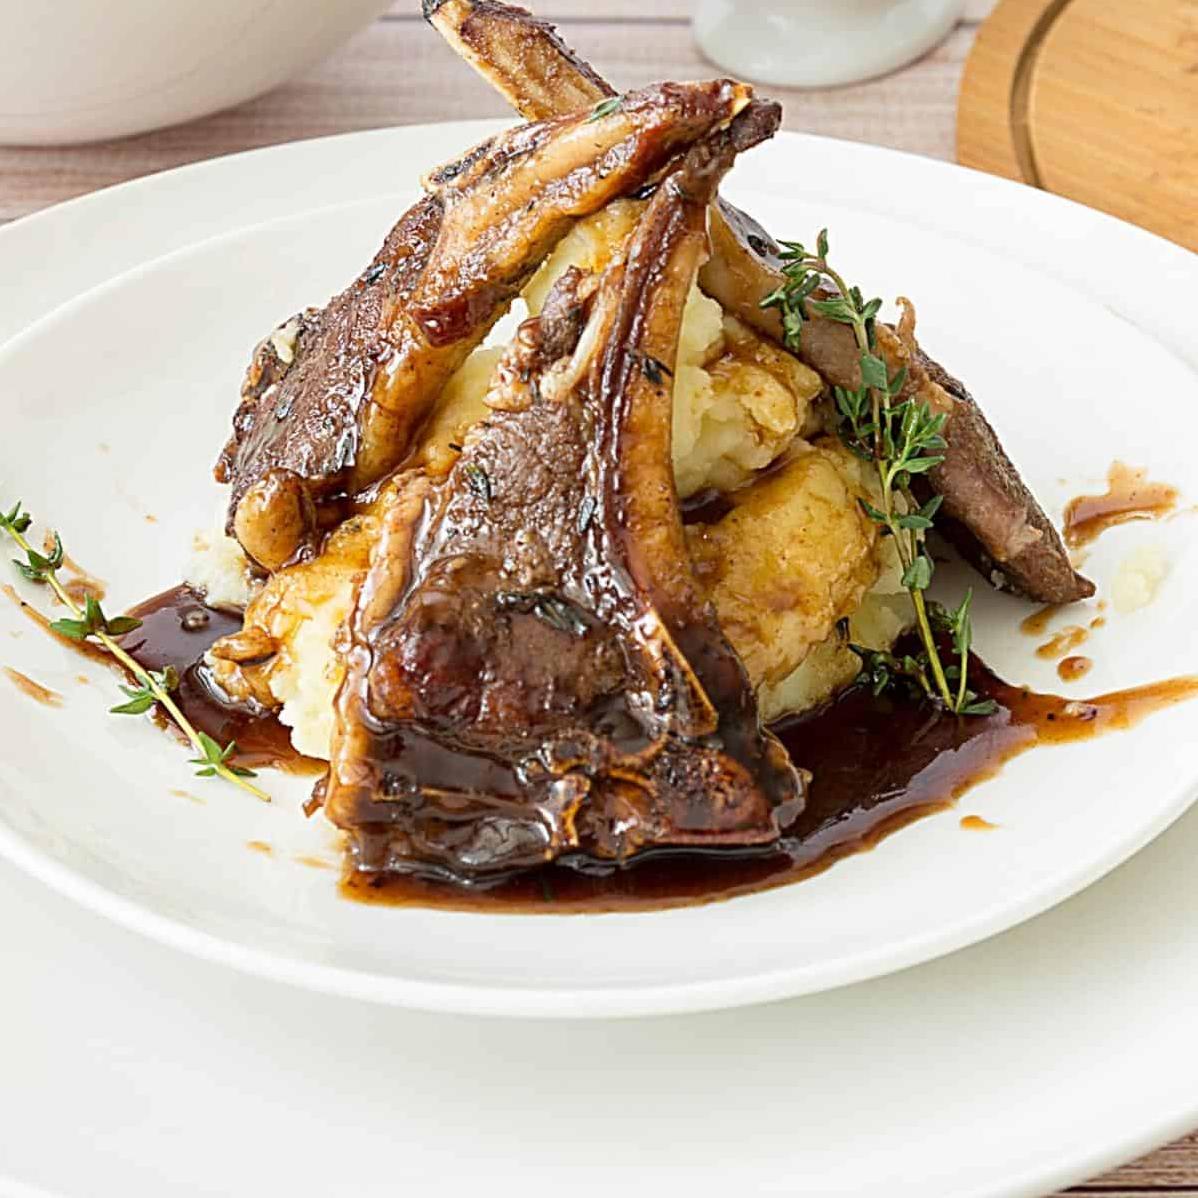  Sizzling lamb chops in a savory wine sauce